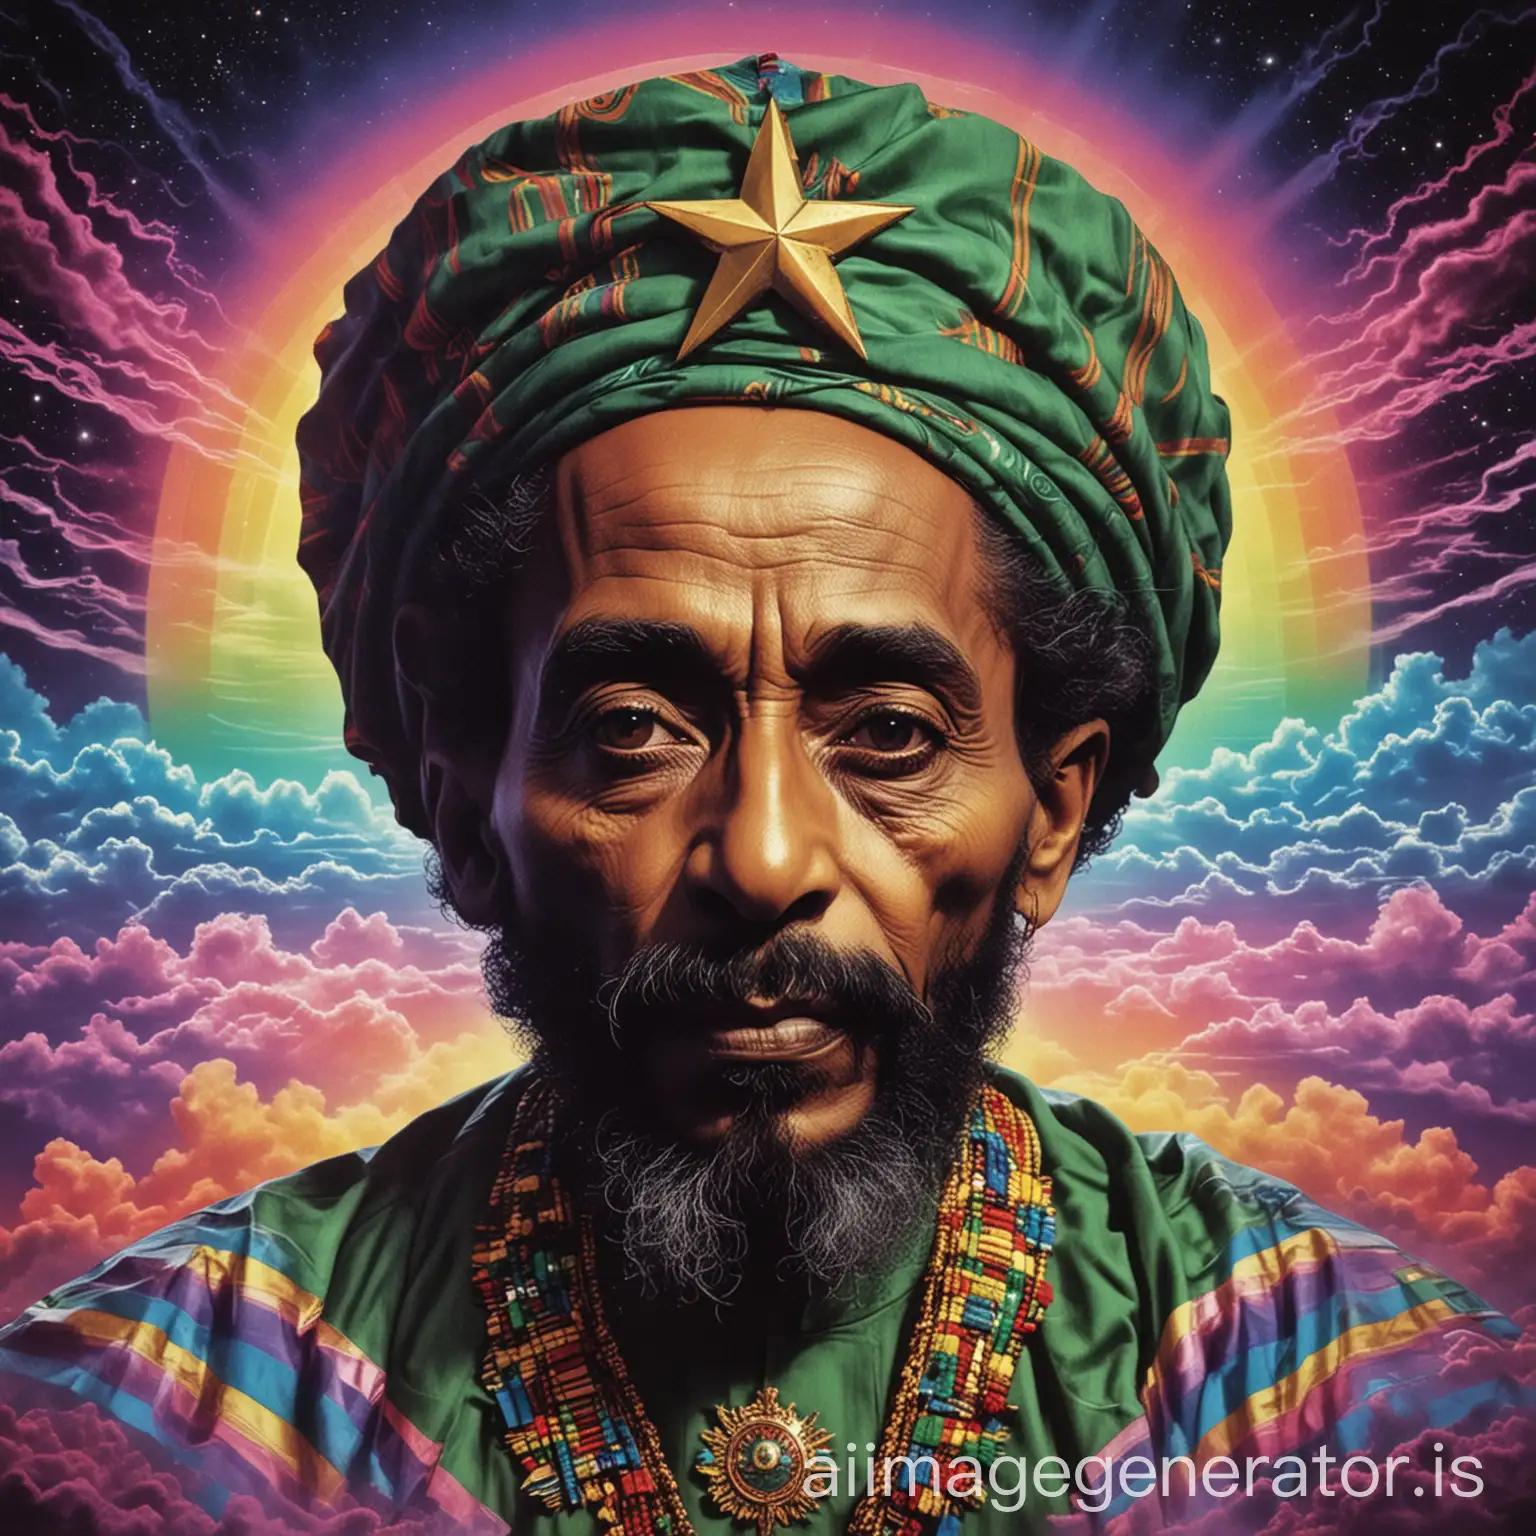 Vapor-Wave-Style-Art-with-Haile-Selassie-in-Center